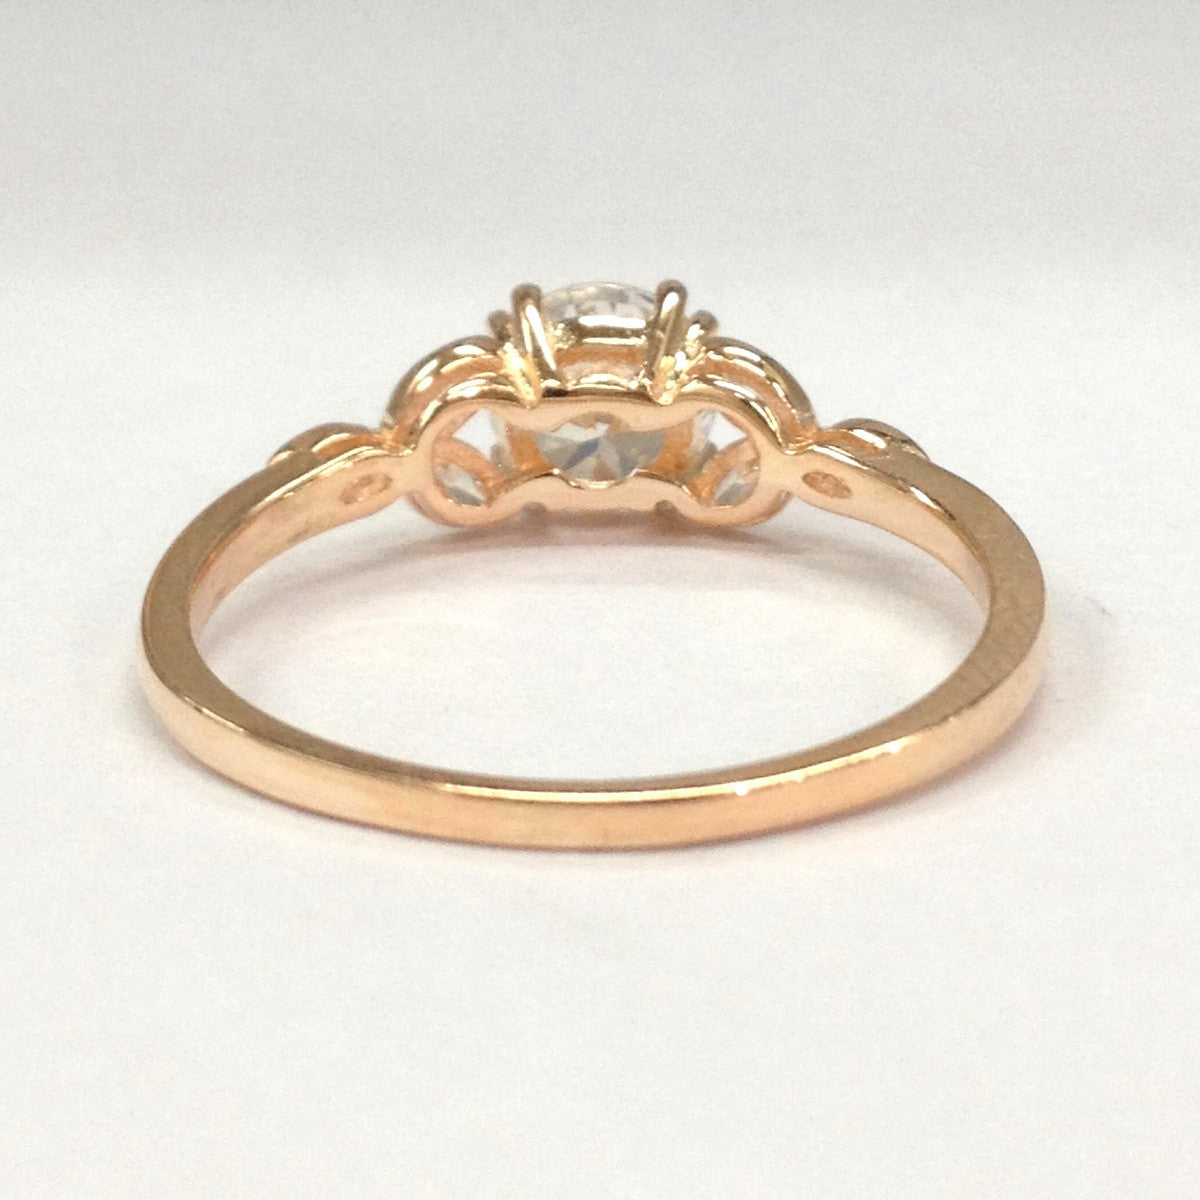 Reserved for AAA-Engagement Semi Mount Ring Marquise Diamond  14K Rose Gold 6.5mm Round